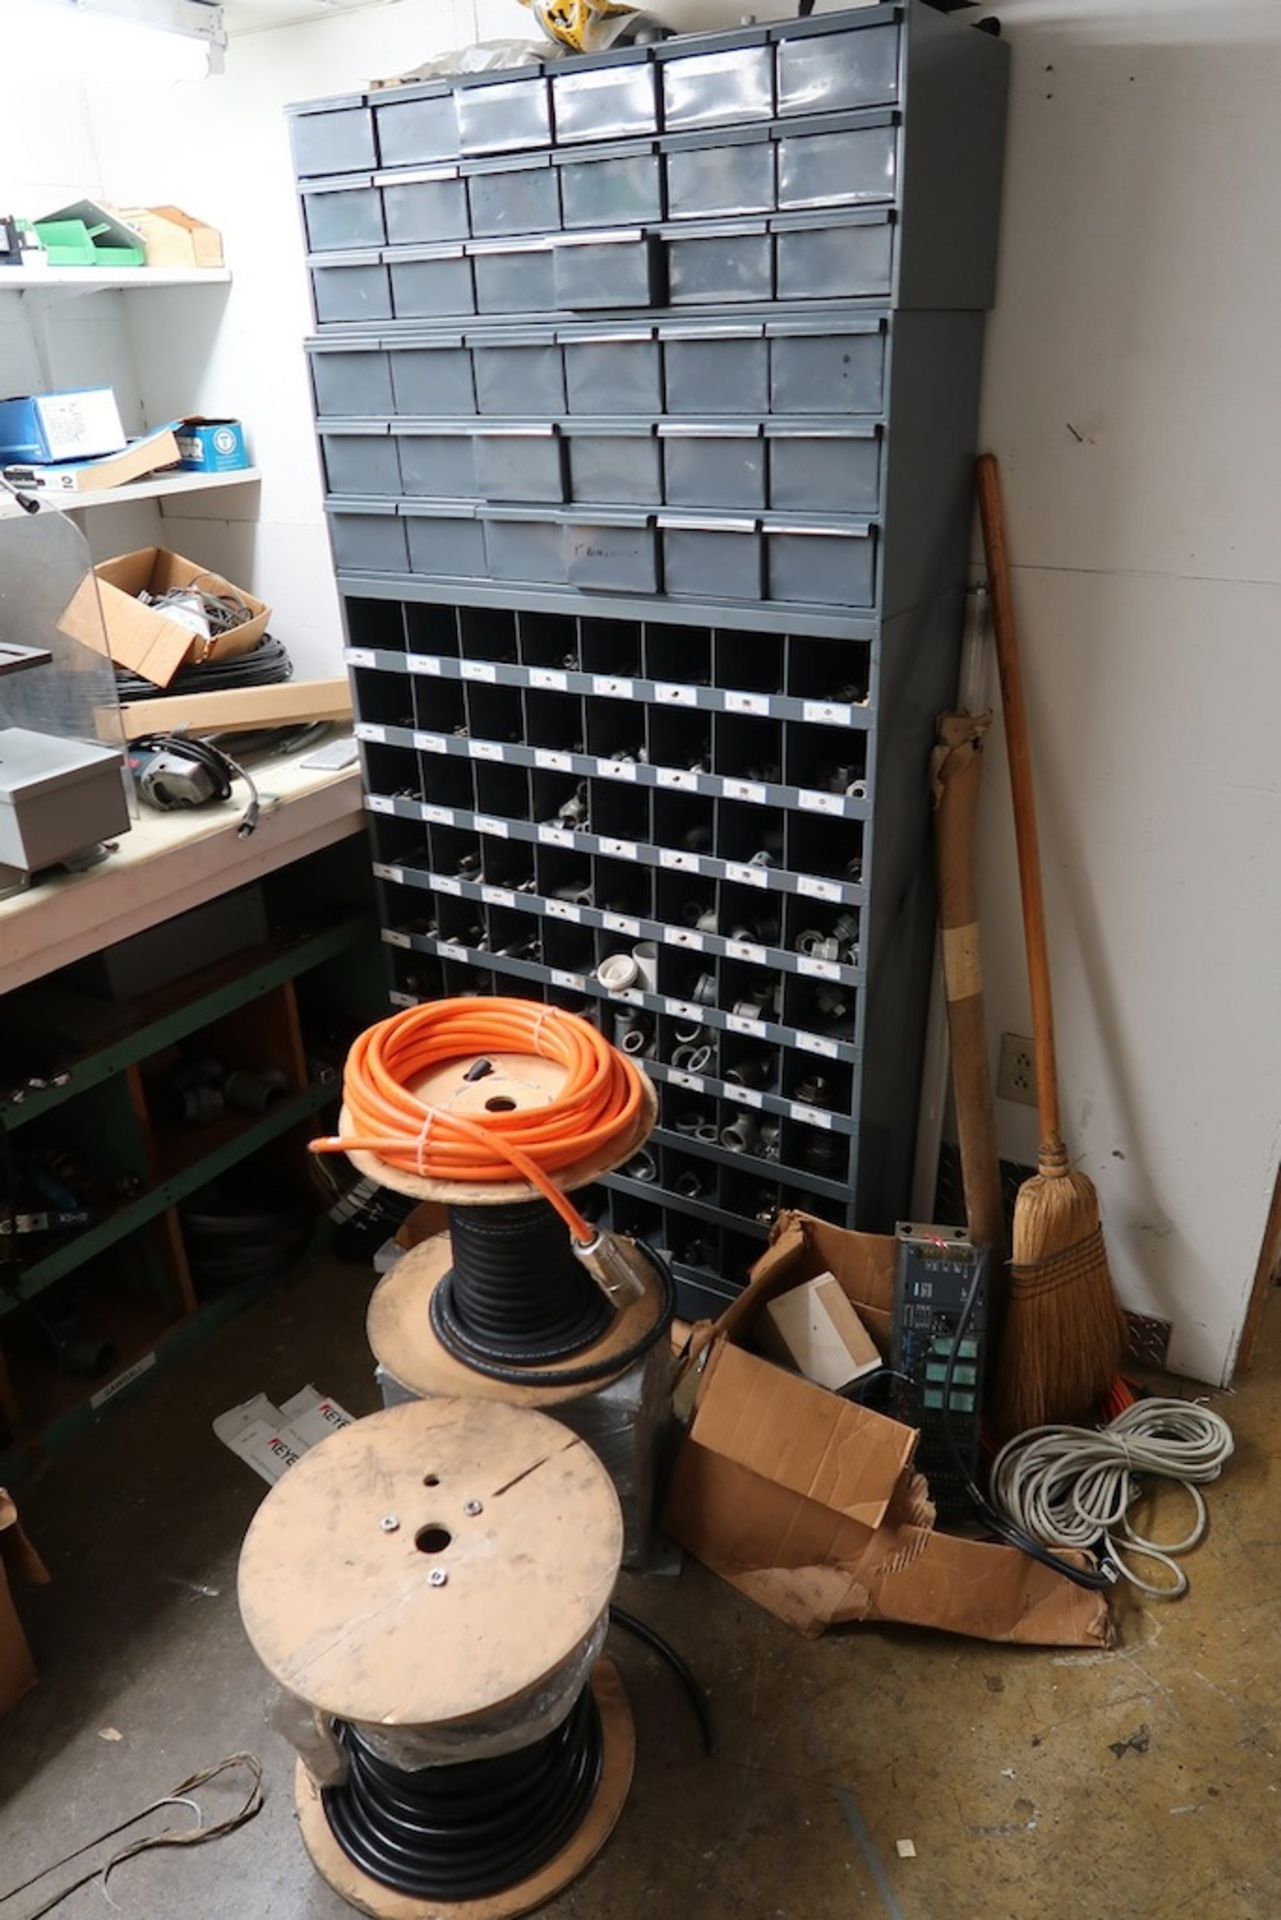 Contents of Spare Parts Room, Including Drives, Digital Counters, Filter Elements, Etc. - Image 19 of 35